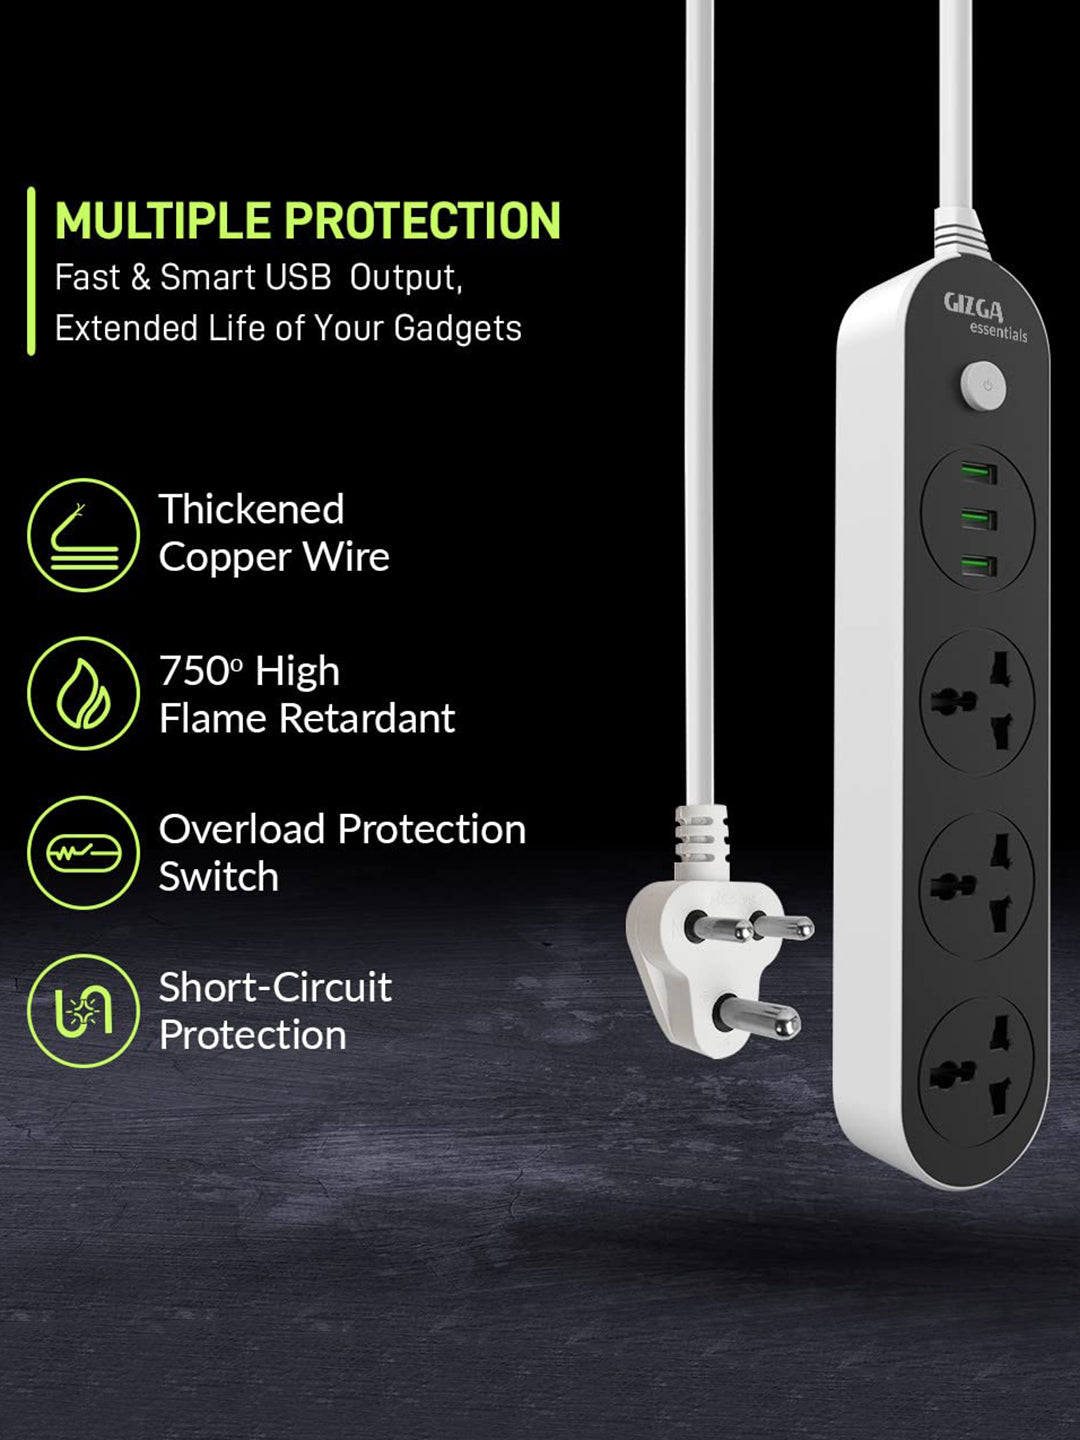 Gizga Essentials Over-Voltage Protection, Fire Retardant Material, 2500W 10A, 3USB Port & 3 Socket Extension Boards